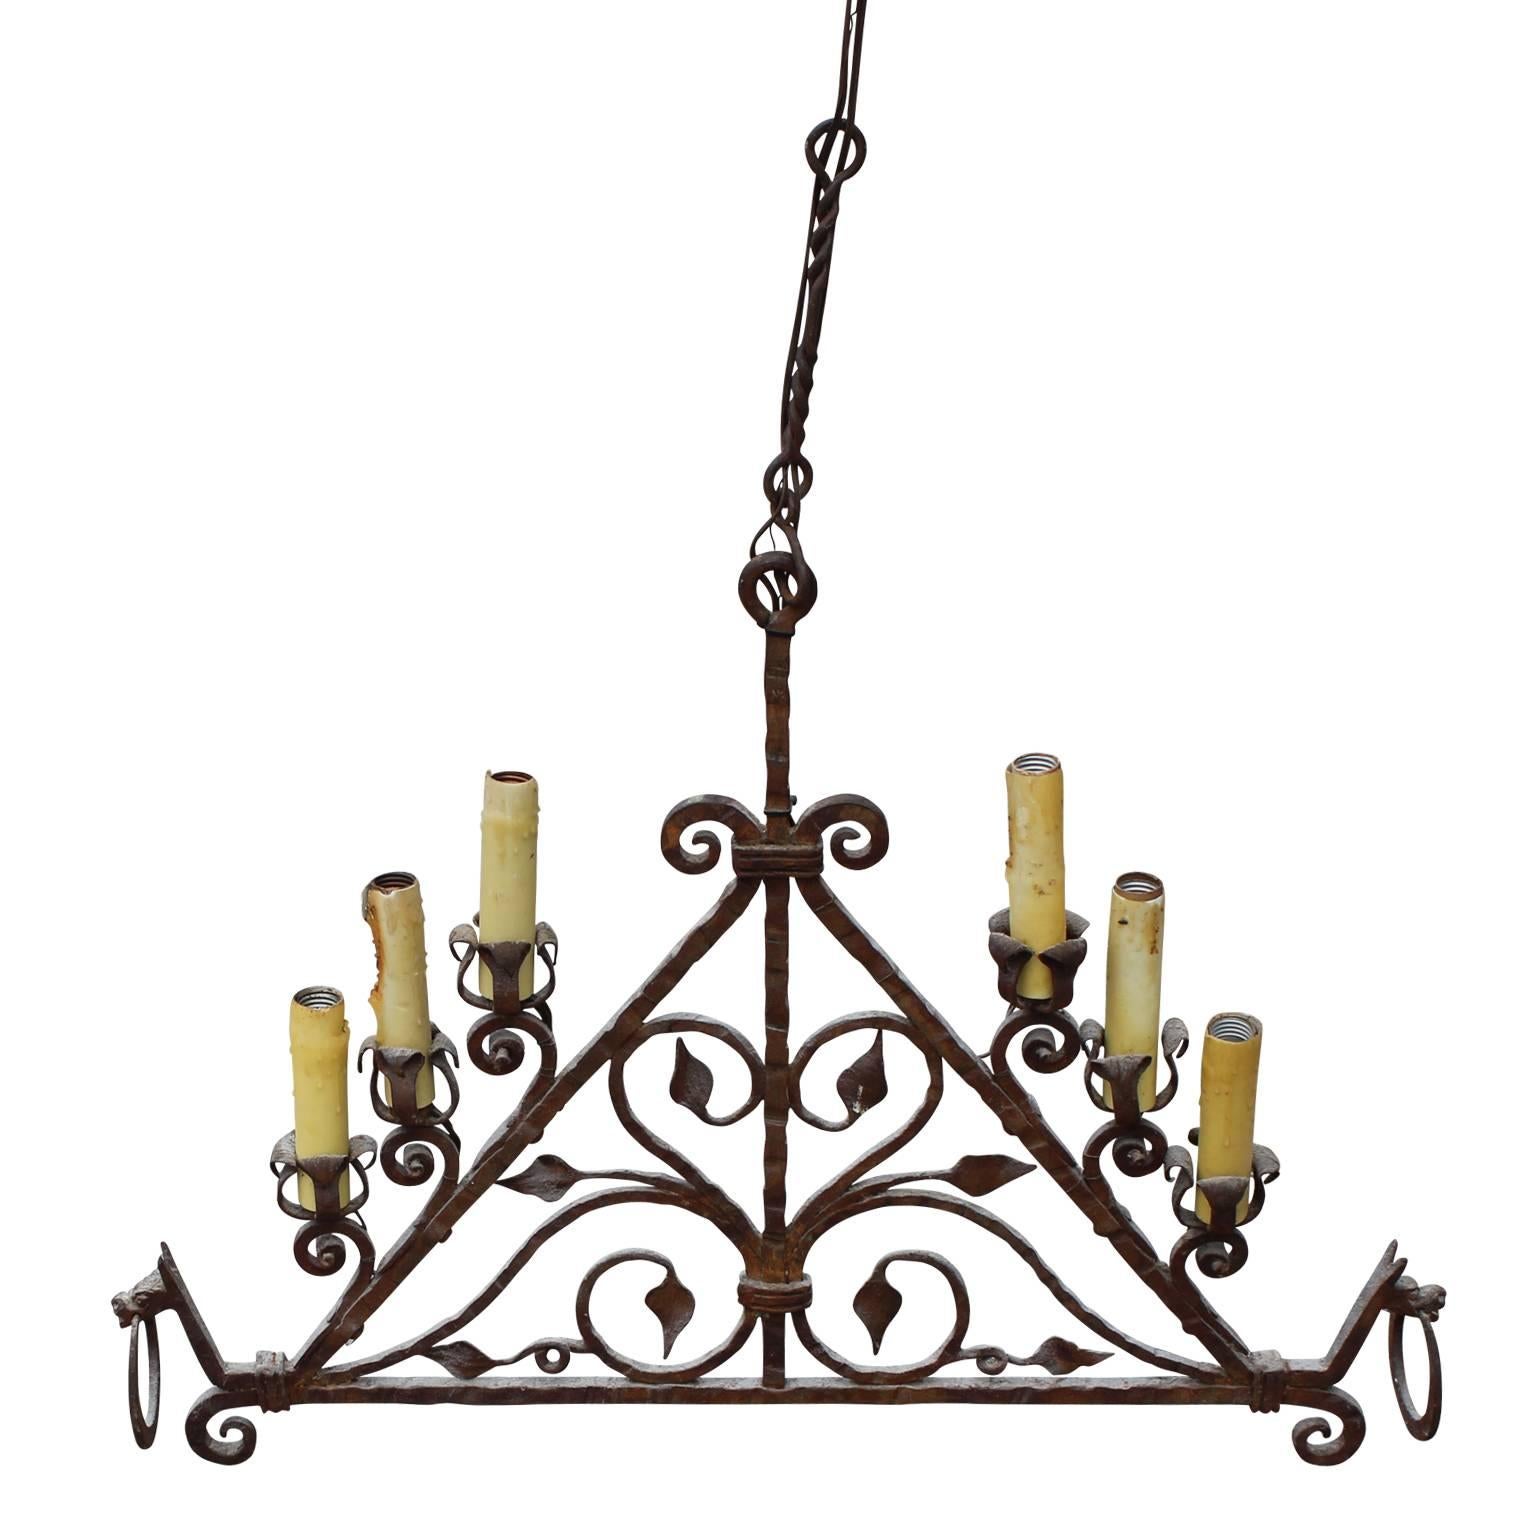 19th Century Wrought Iron Horse Hanging Chandelier or Candelabra